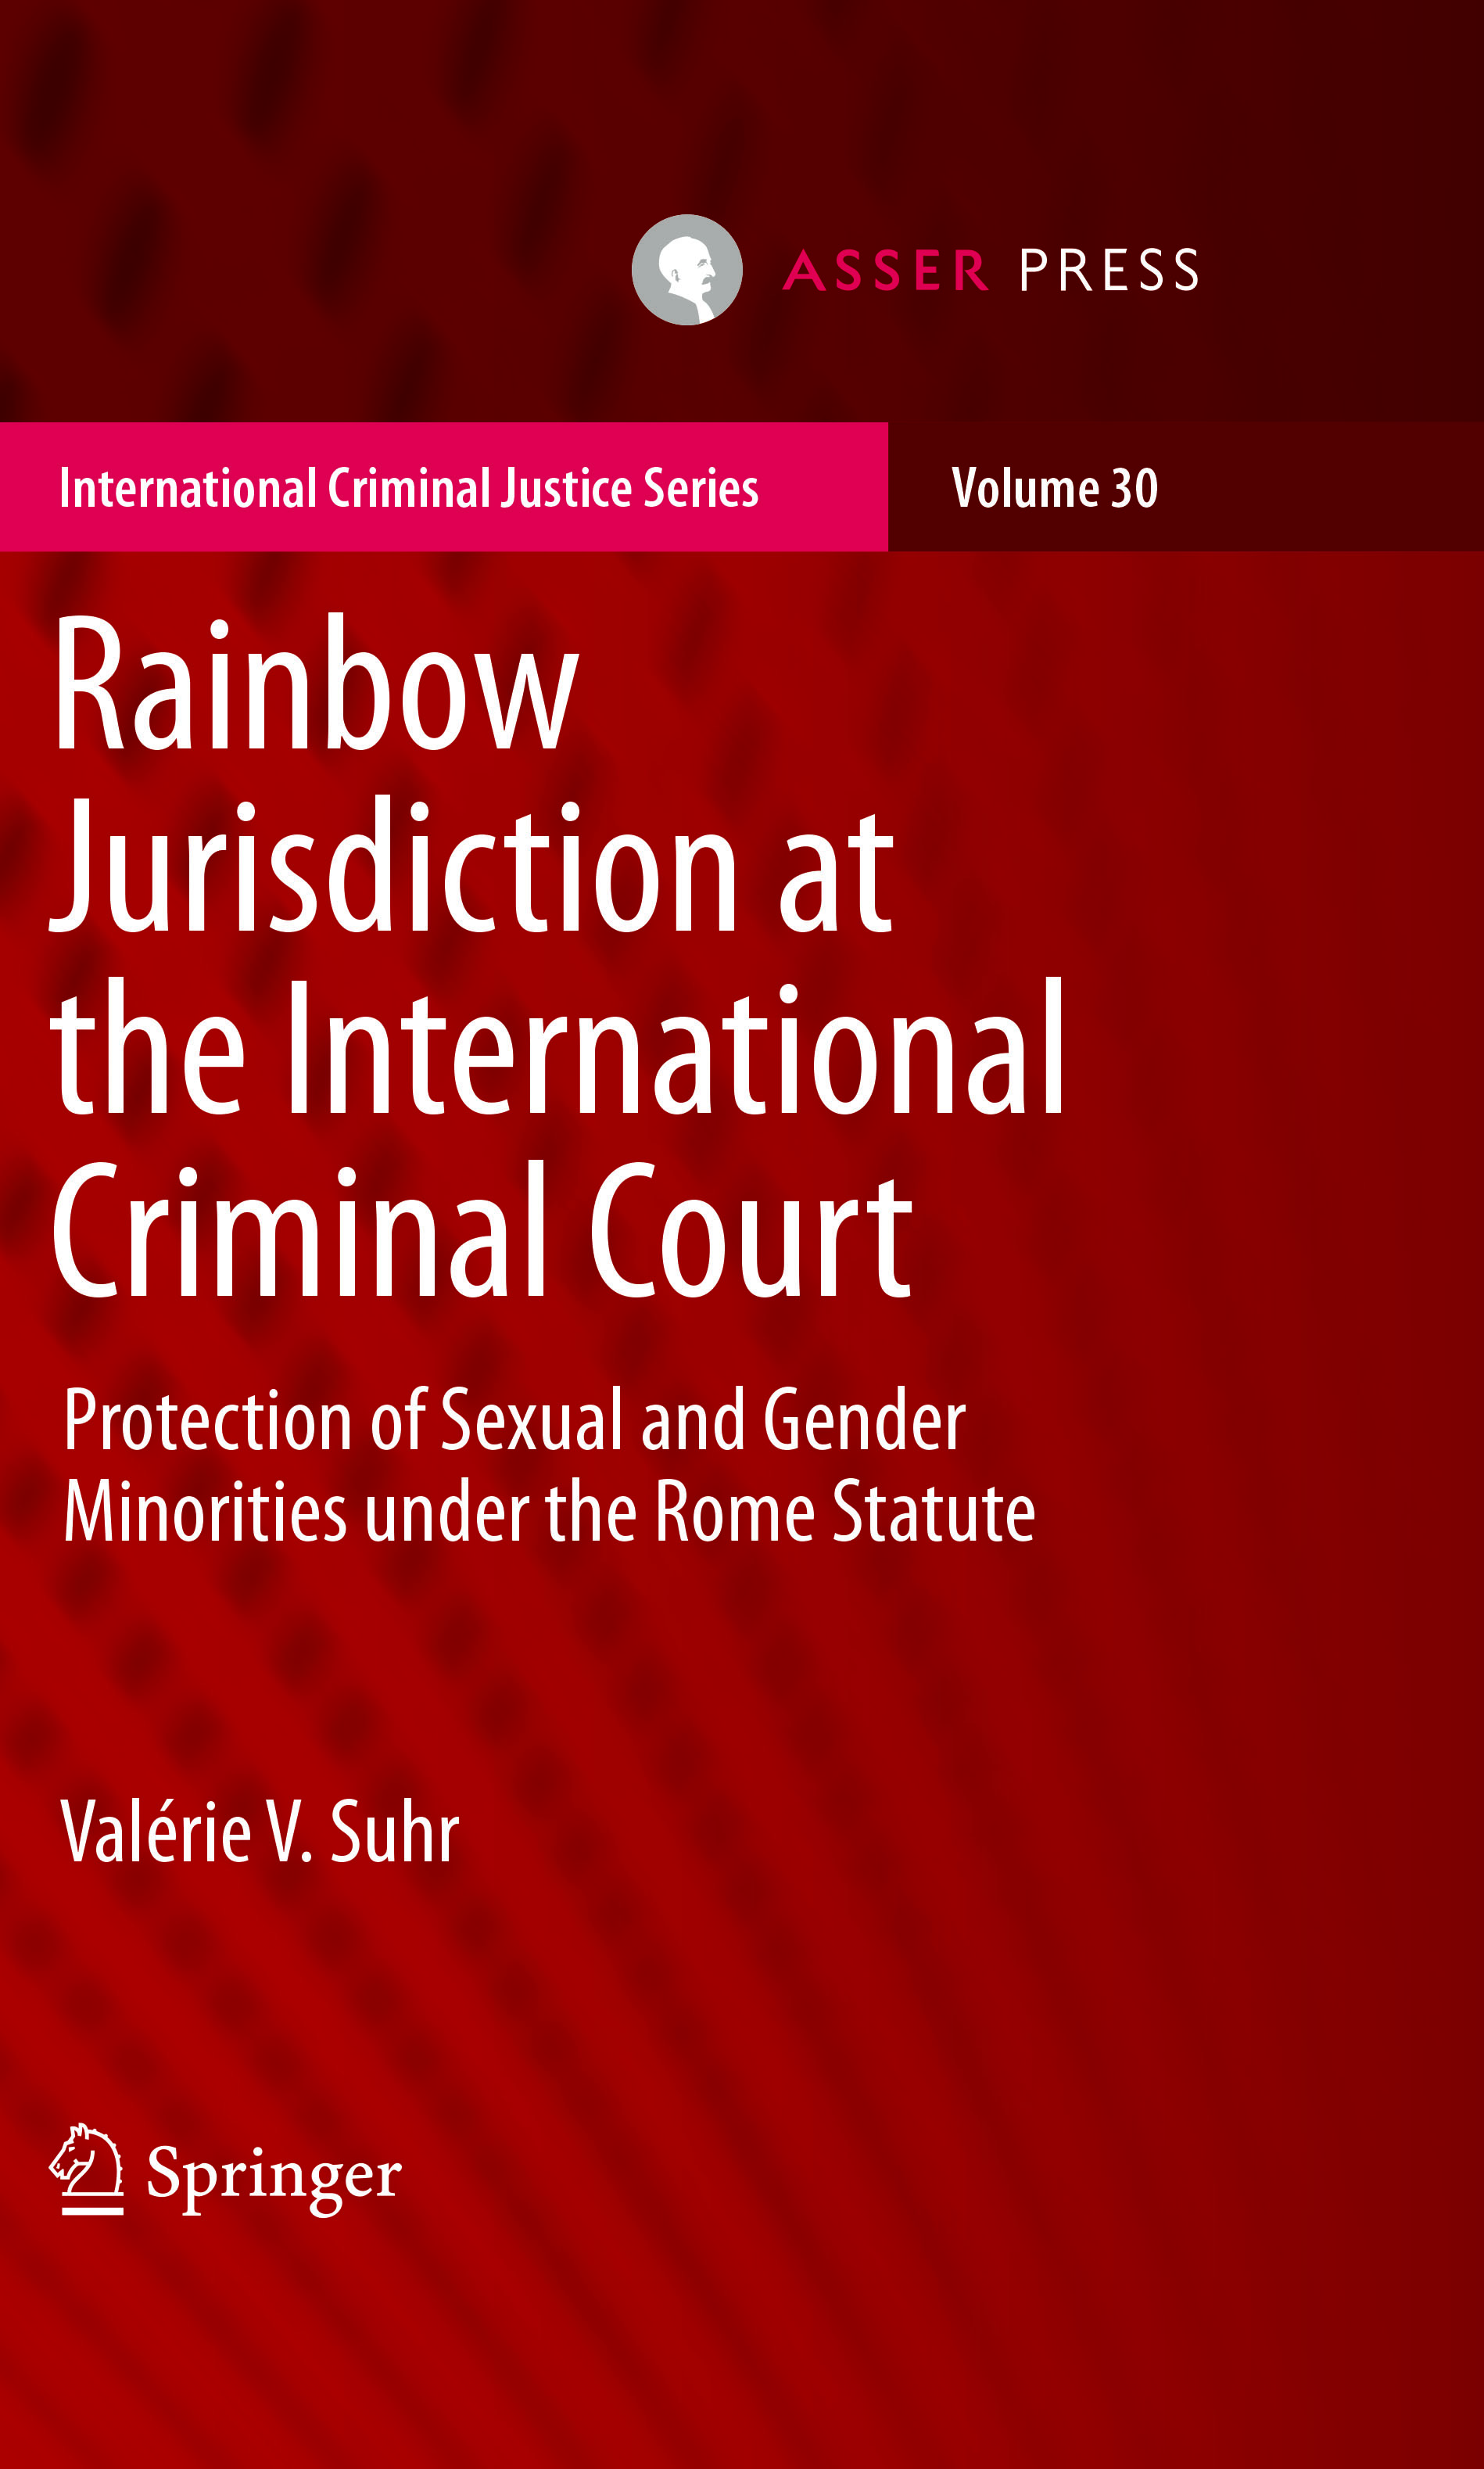 Rainbow Jurisdiction at the International Criminal Court - Protection of Sexual and Gender Minorities under the Rome Statute